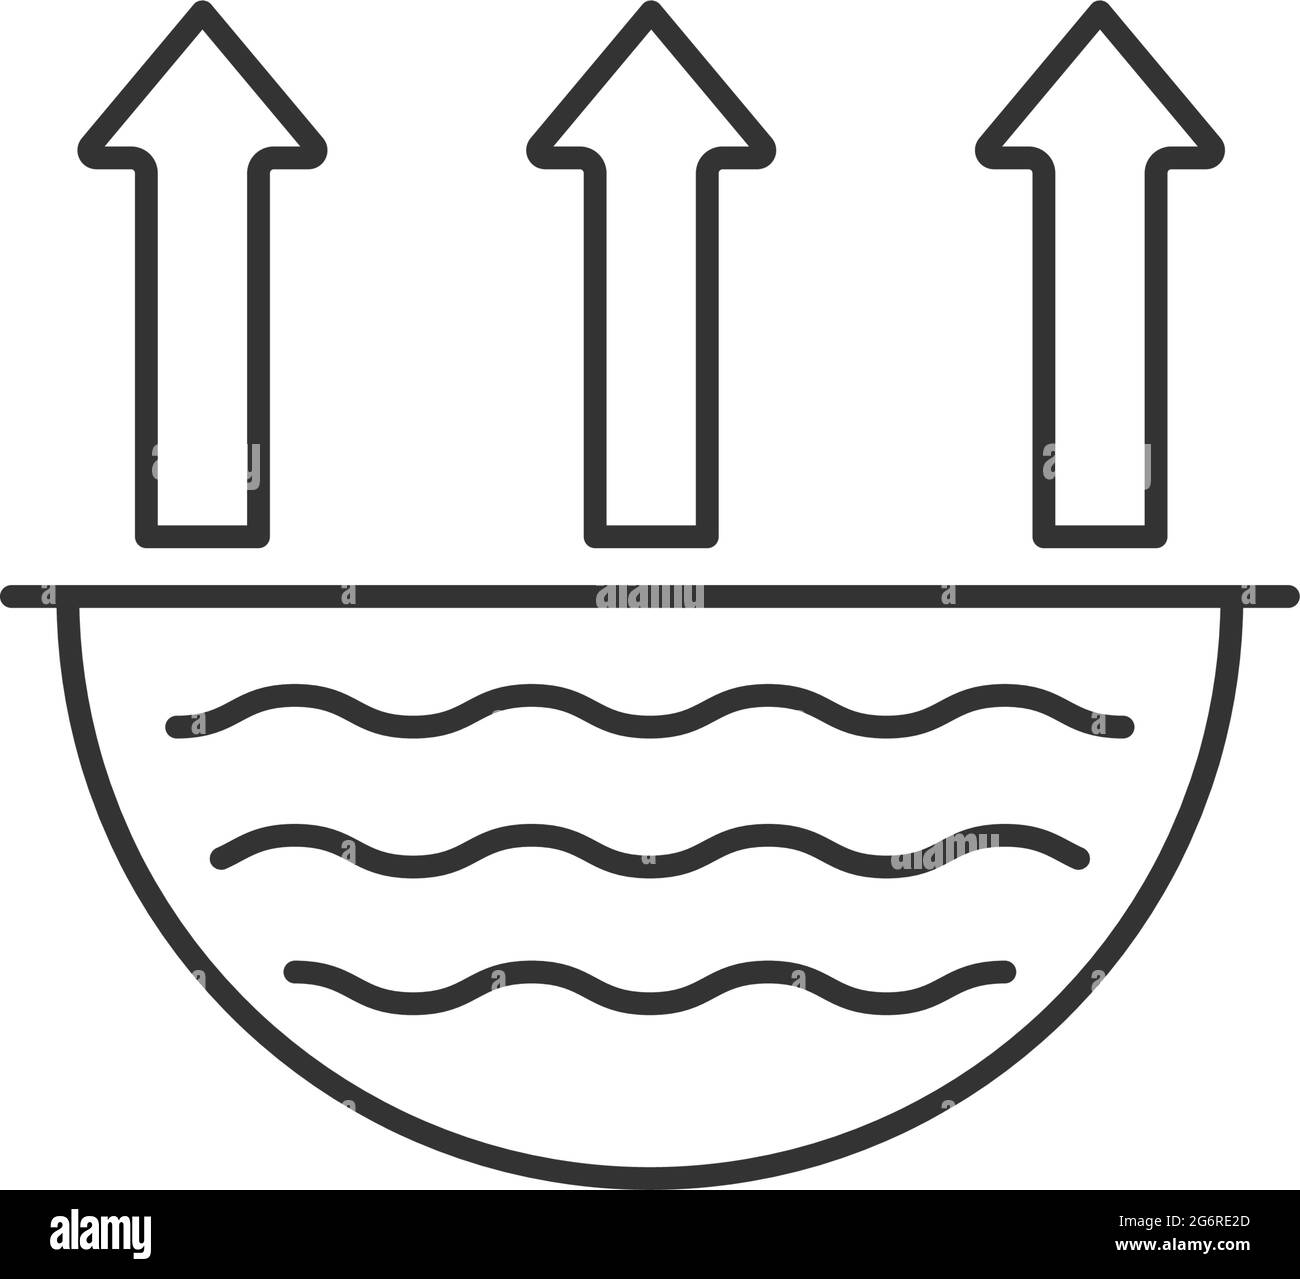 Water evaporation issue linear icon Stock Vector